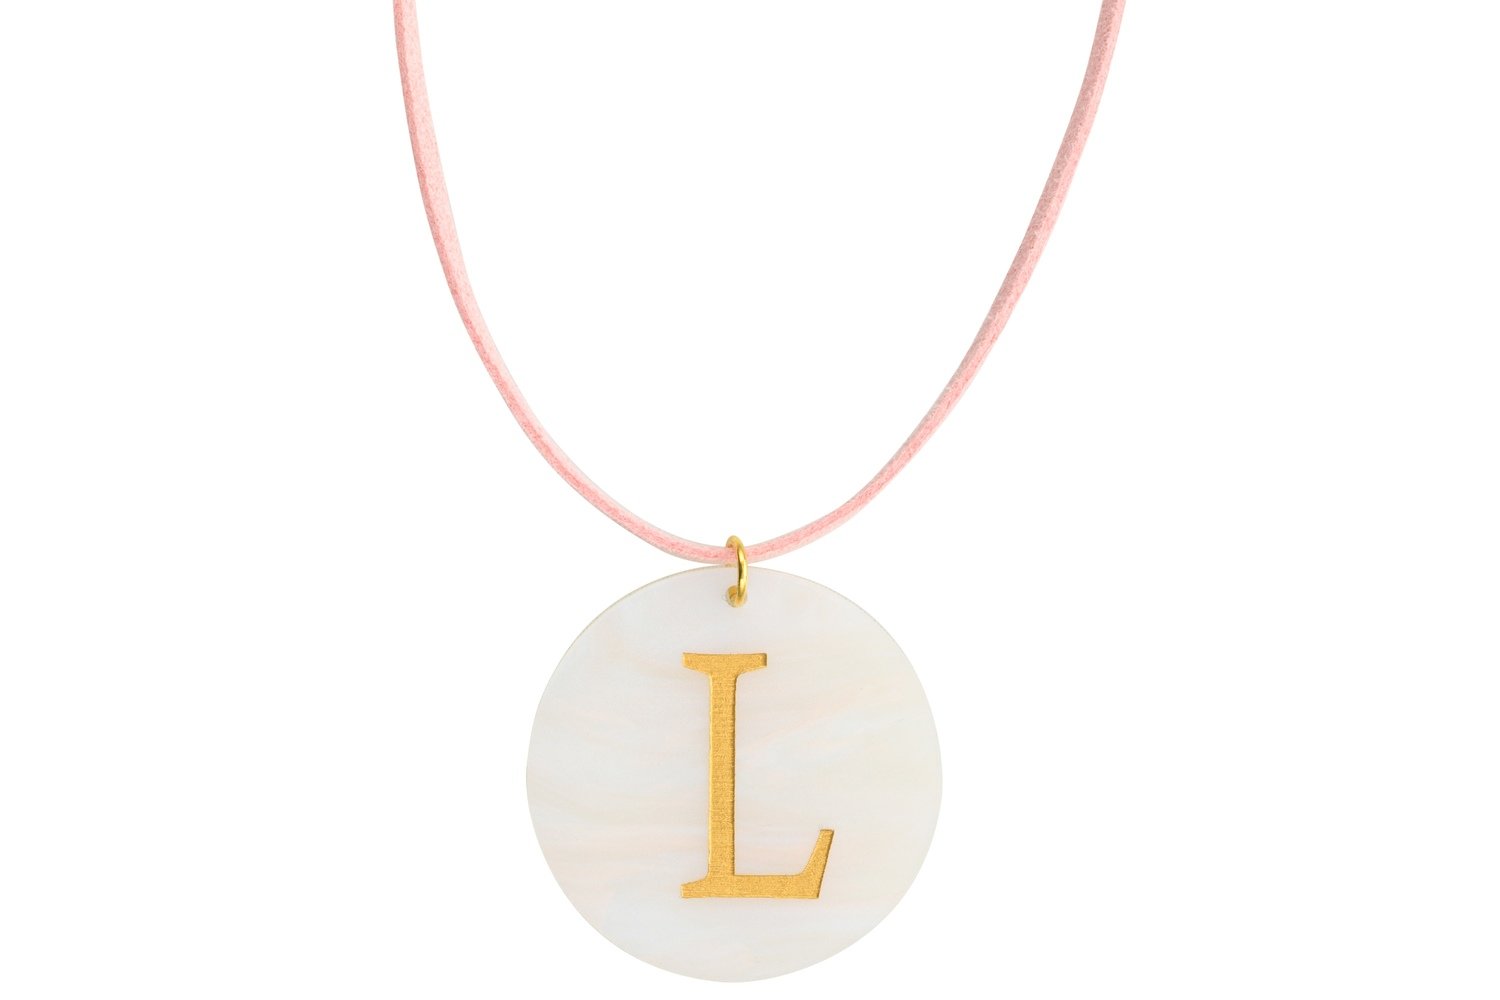 Alphabet Pendant with Suede Leather Cord Necklace